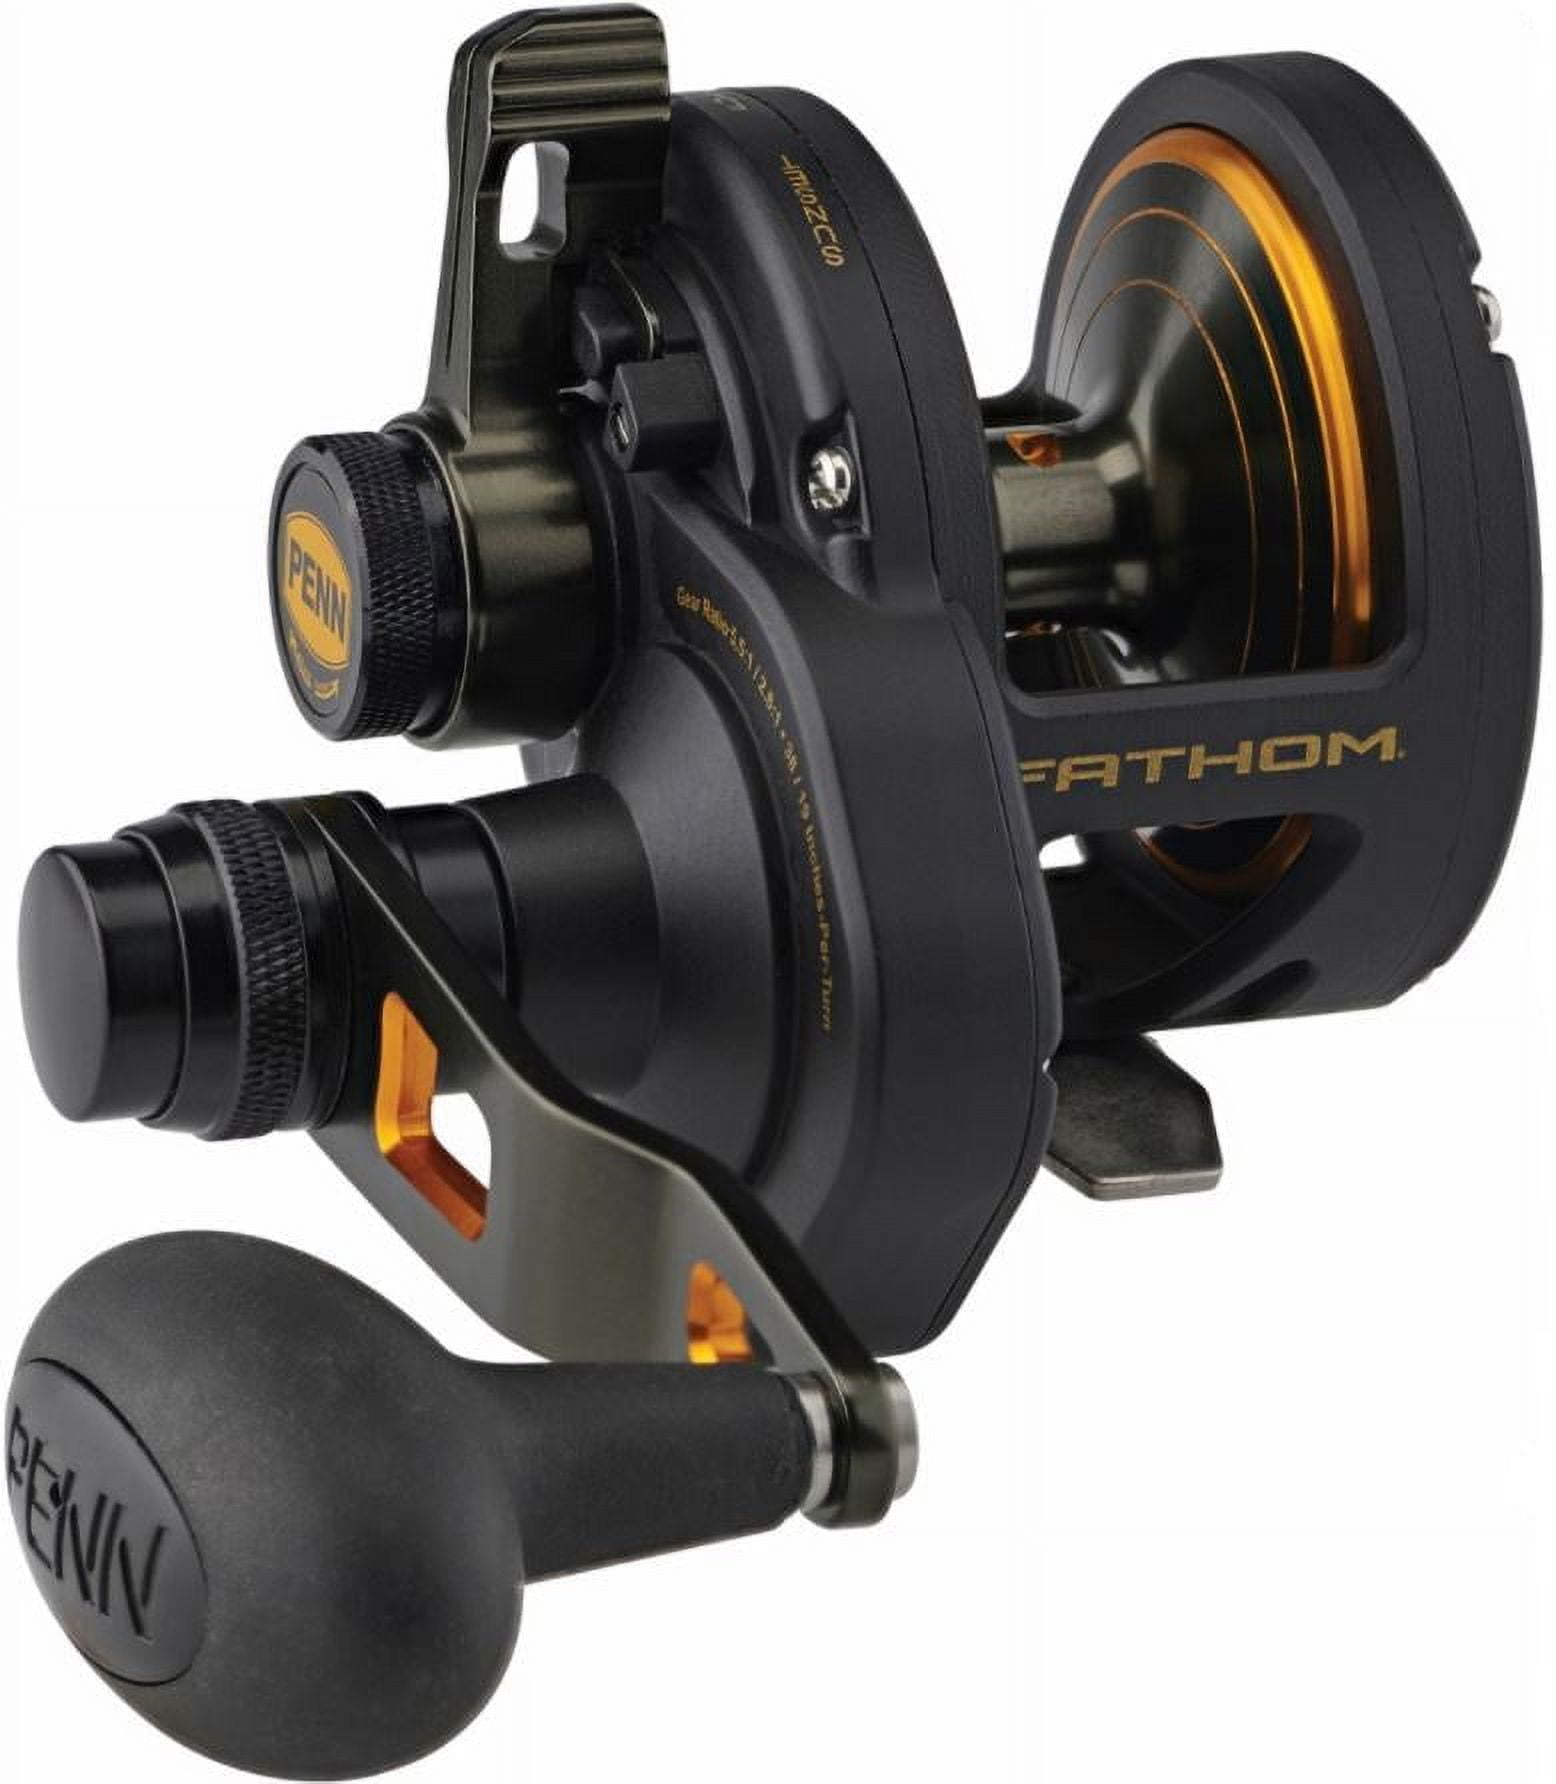 PENN Conventional 2-Speed Right-Handed Reel FATHOM II LEVER DRAG